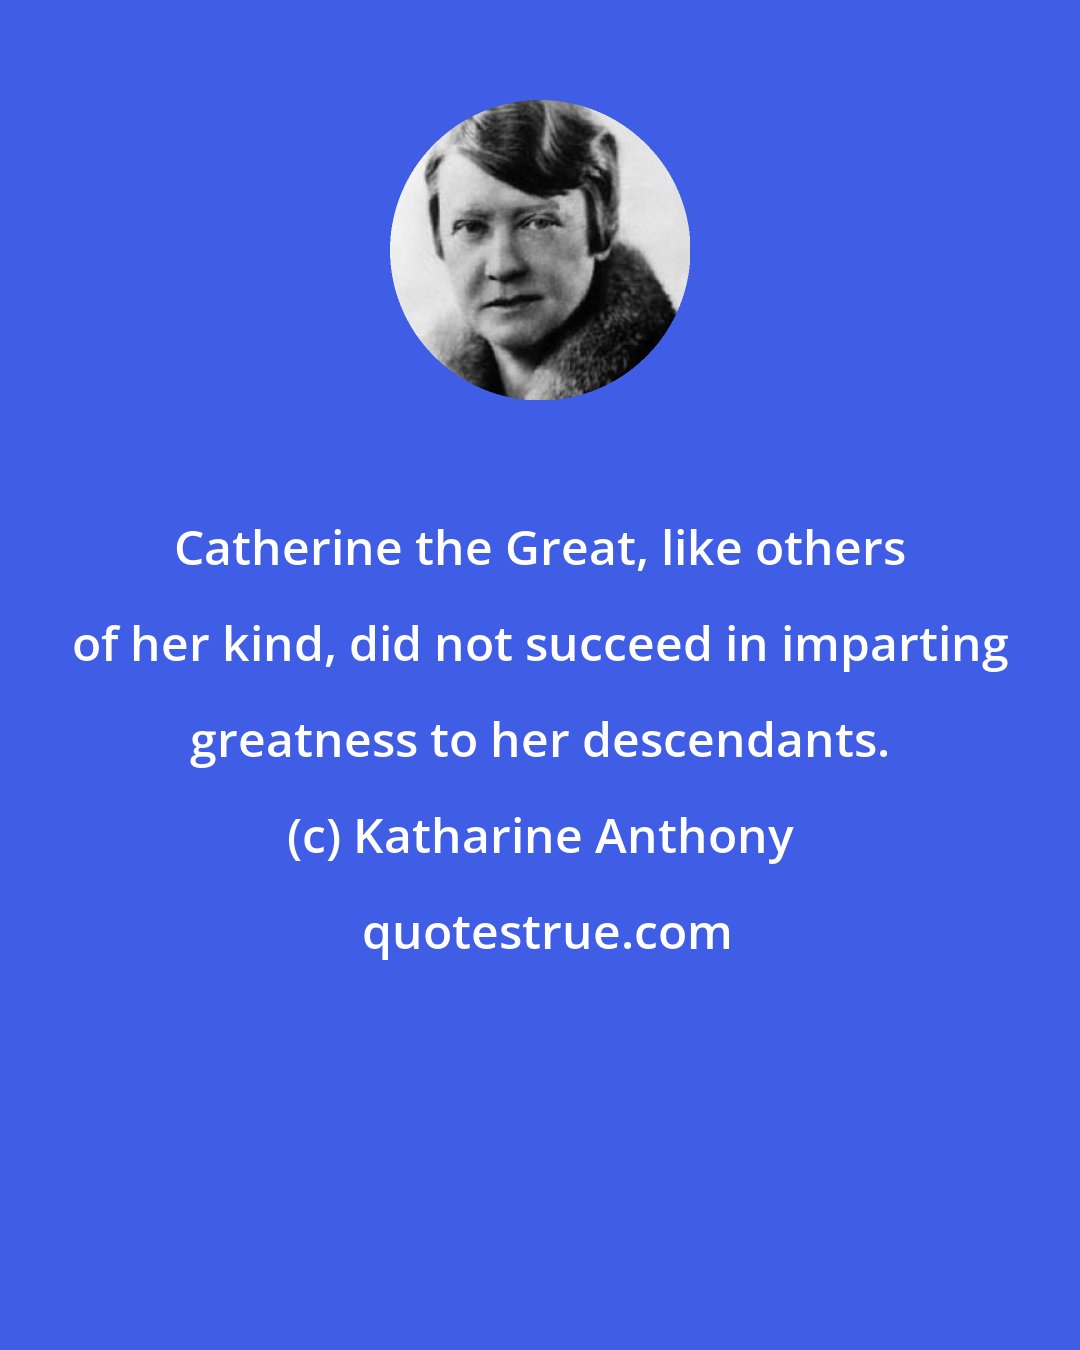 Katharine Anthony: Catherine the Great, like others of her kind, did not succeed in imparting greatness to her descendants.